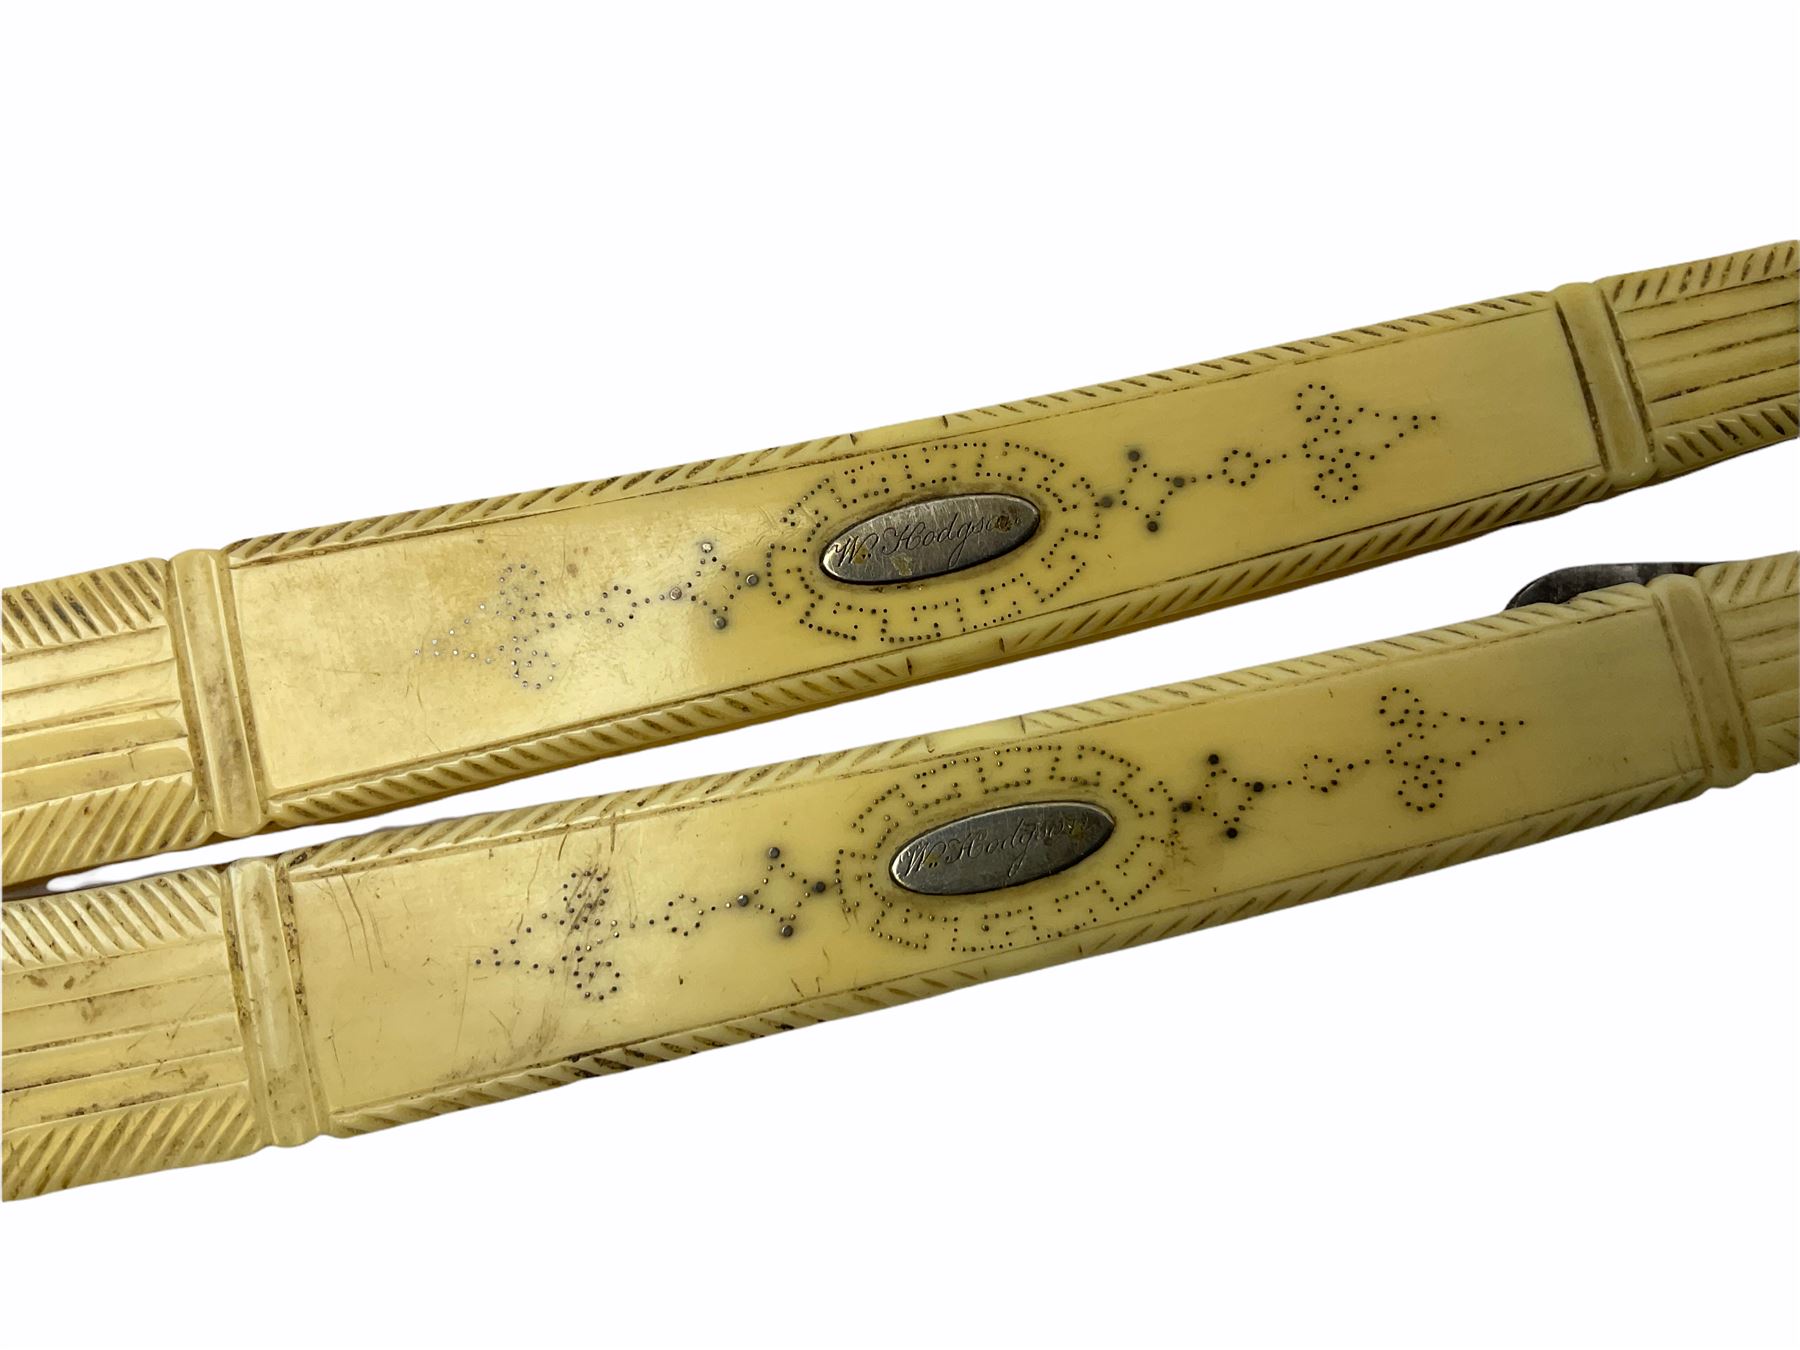 Pair of early 19th century John Barber ivory cut-throat razors with pique work decoration - Image 3 of 10